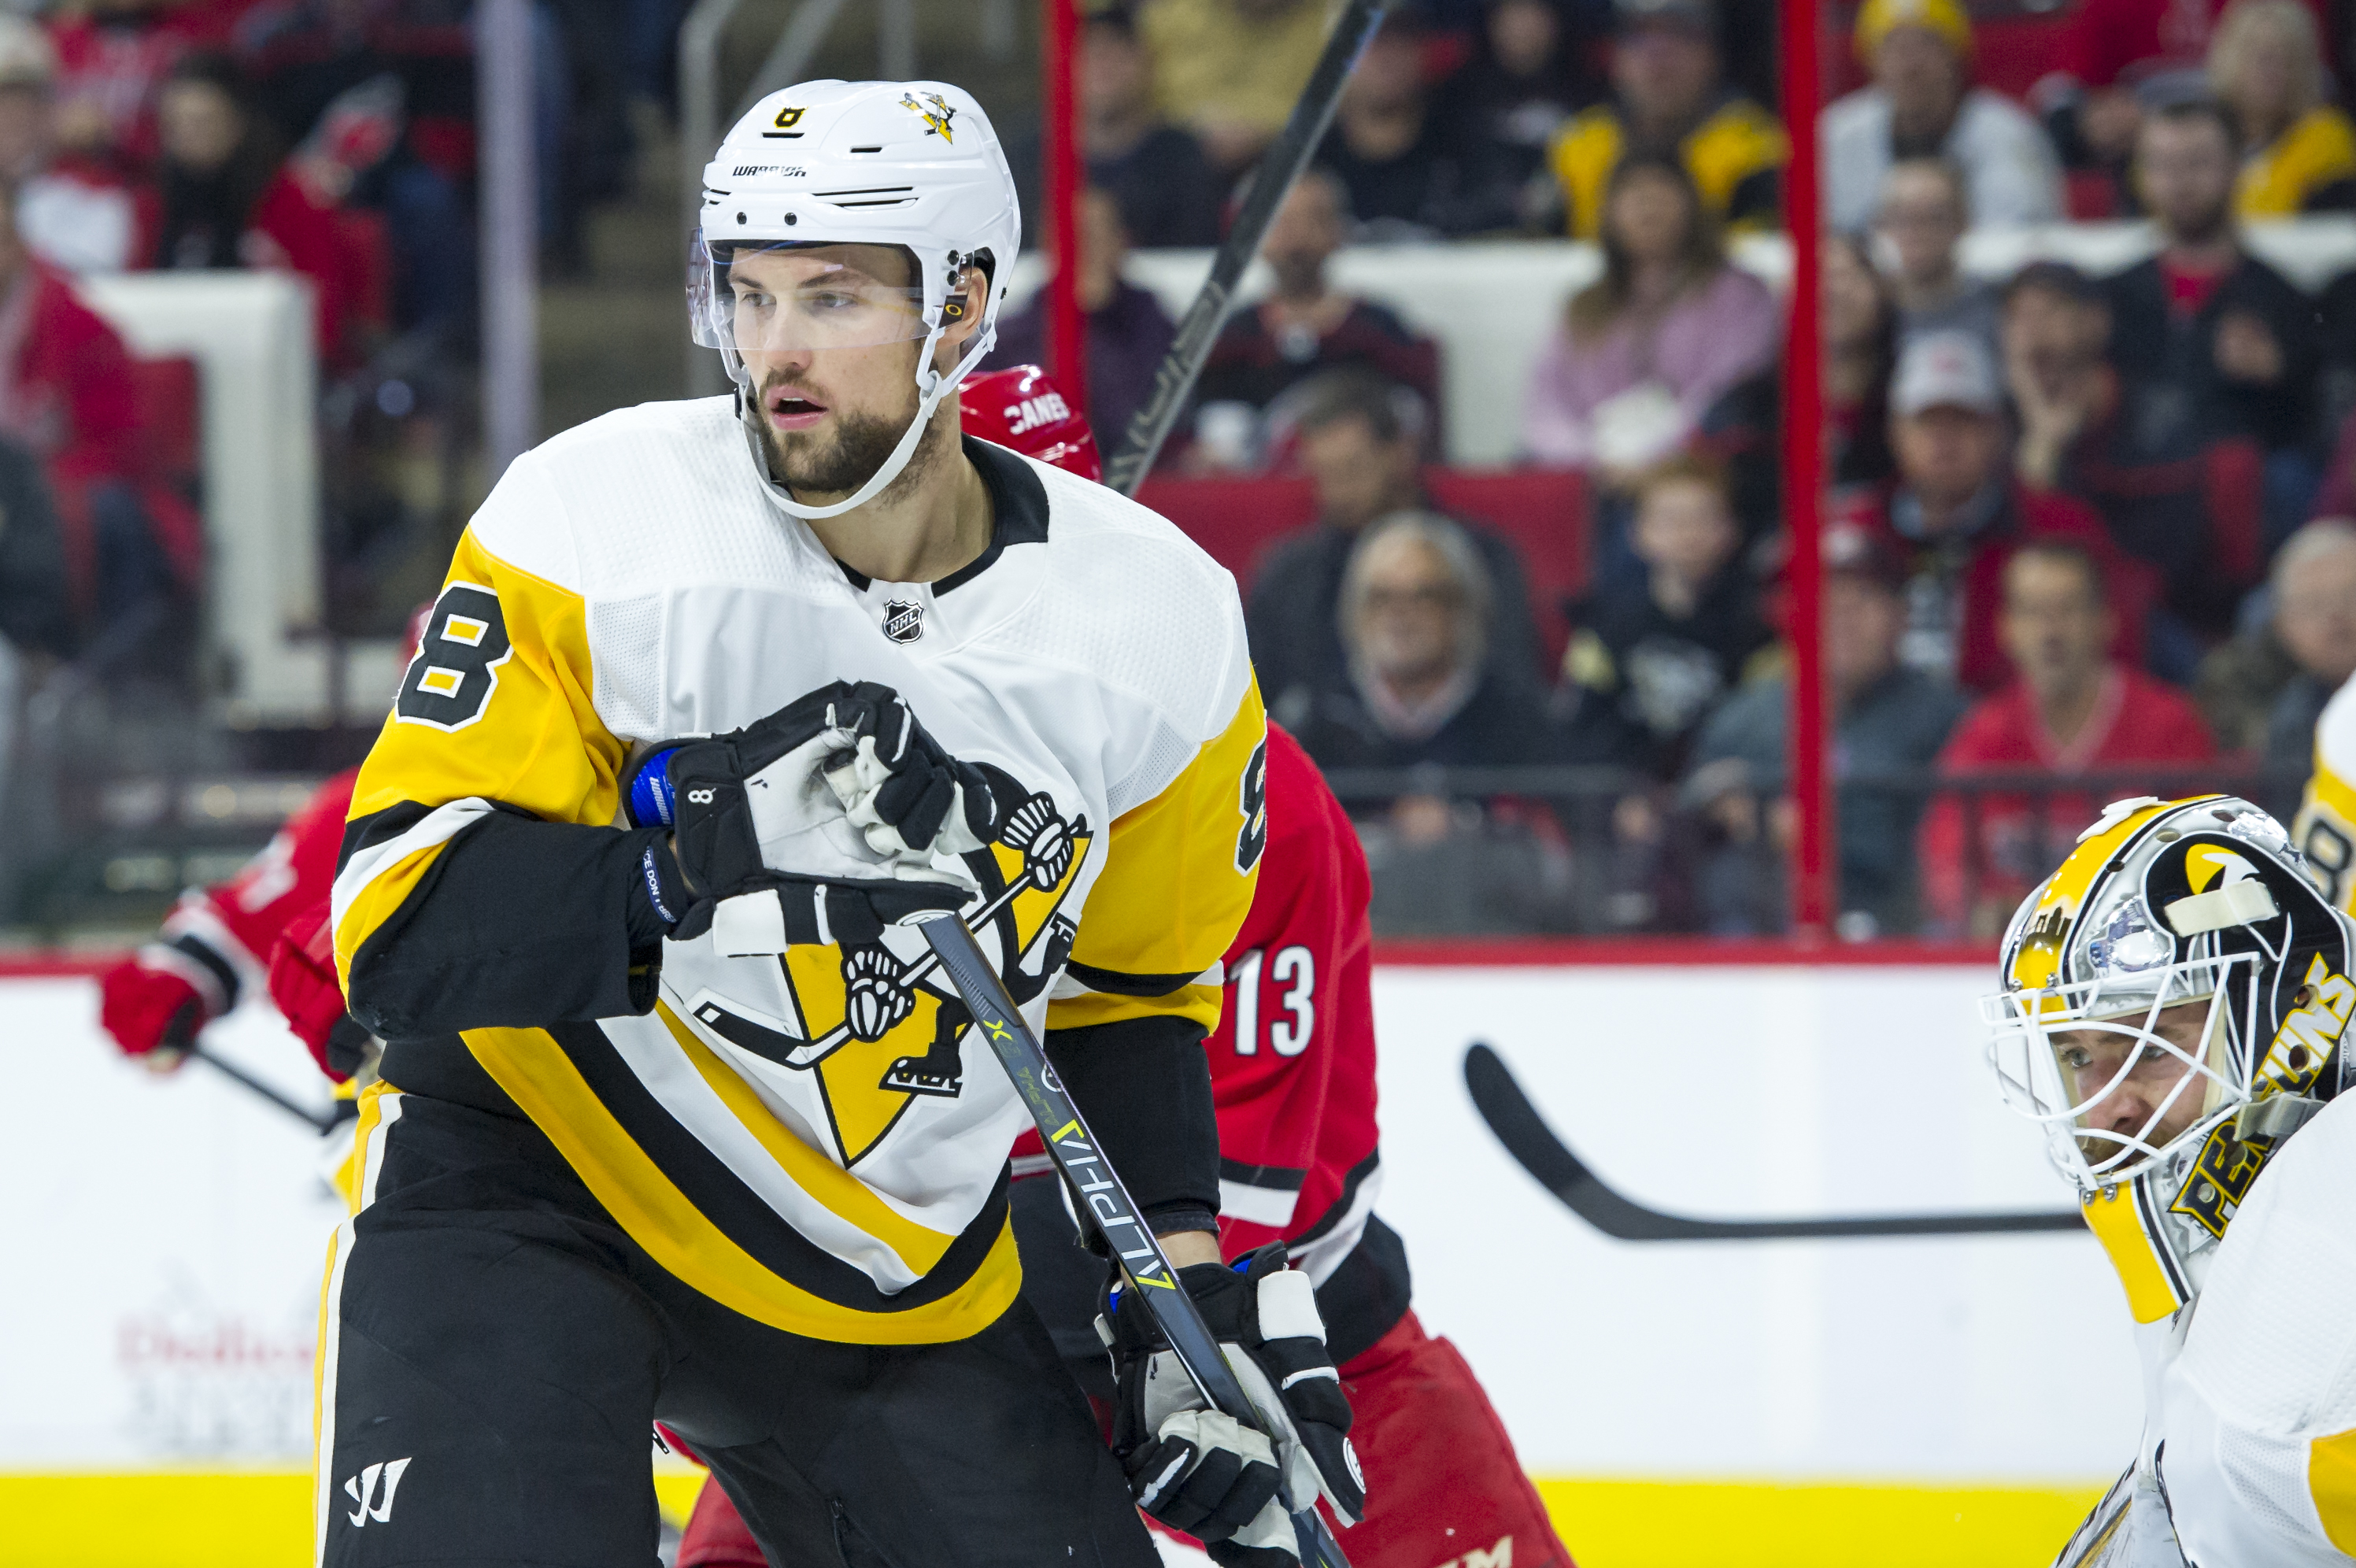 As Games Take on a Playoff Feel, Penguins Look to Improve Attention to Detail